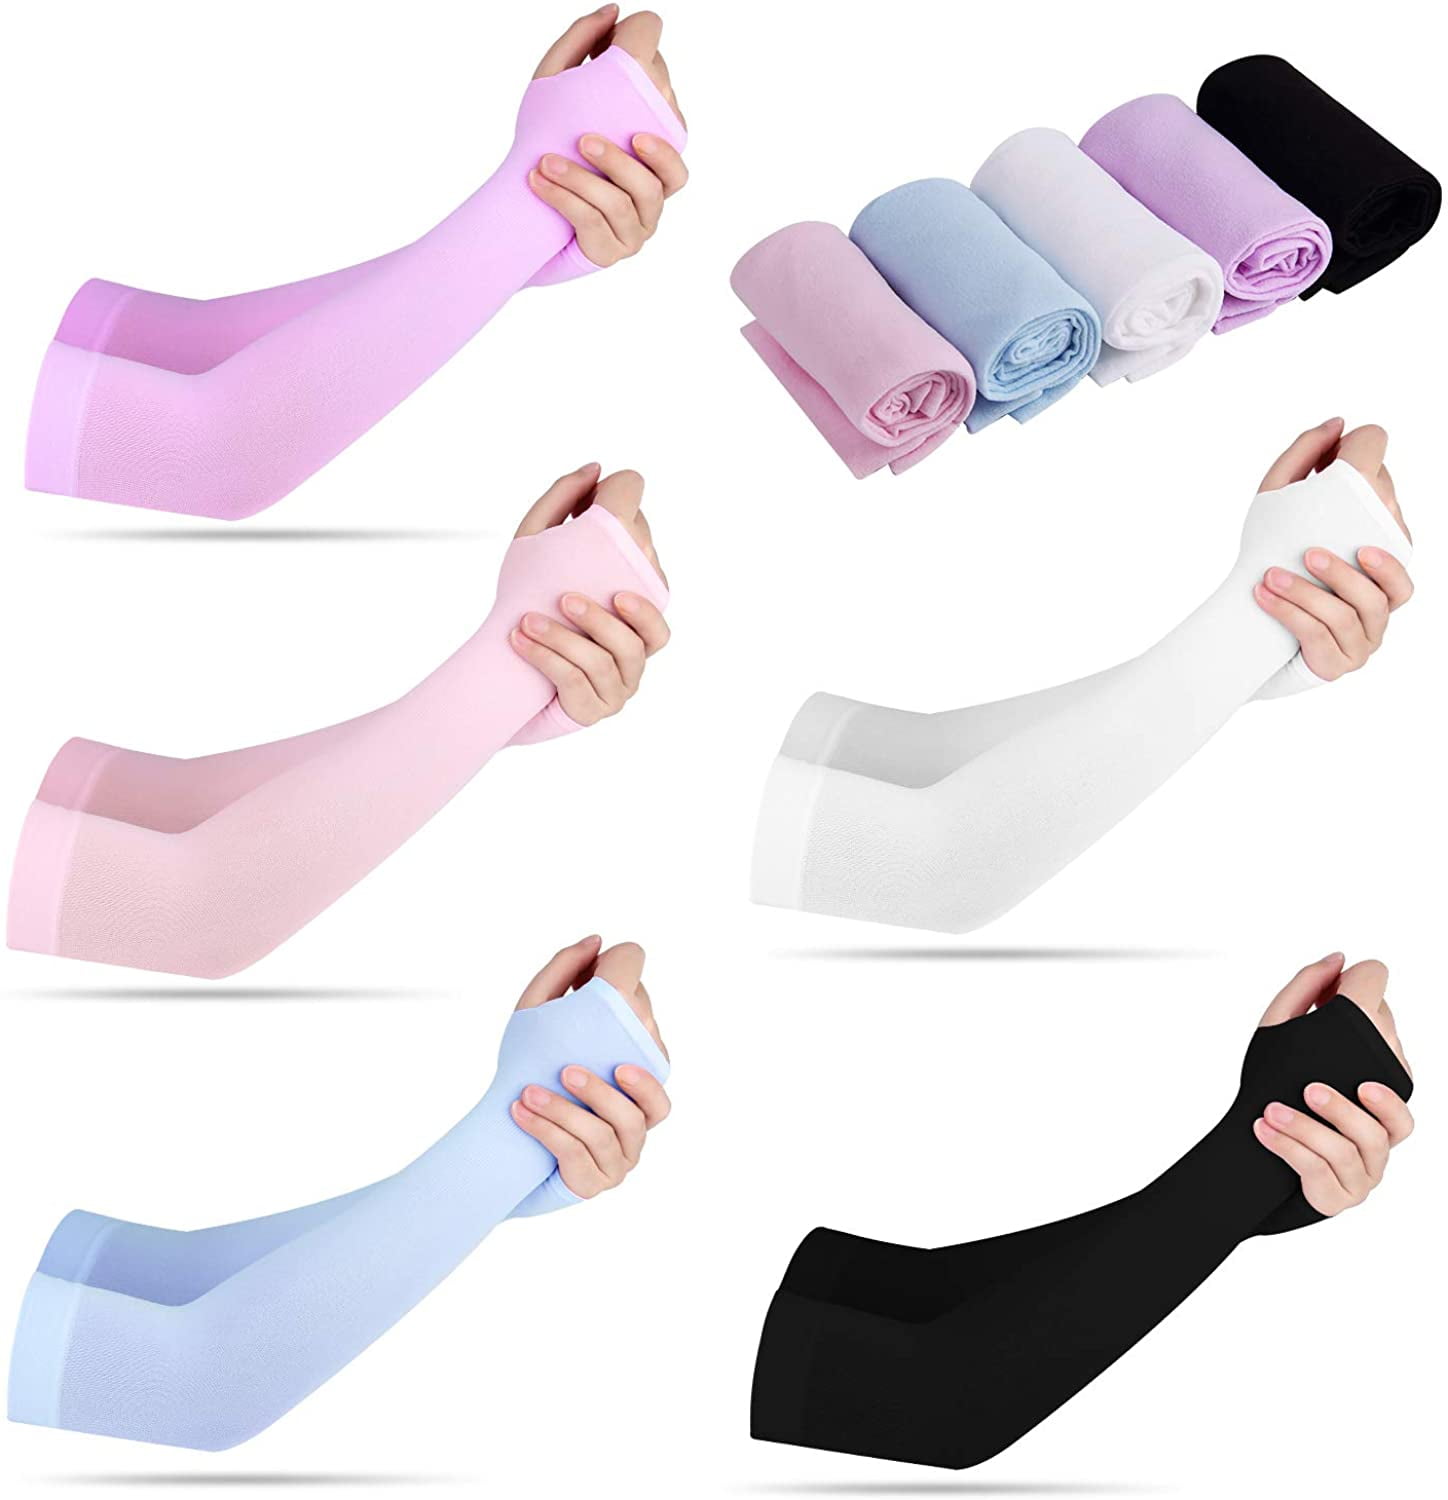 1-5 PAIR Cooling Arm Sleeves Sun UV Protection Hand Cover Stretch Outdoor Sport 